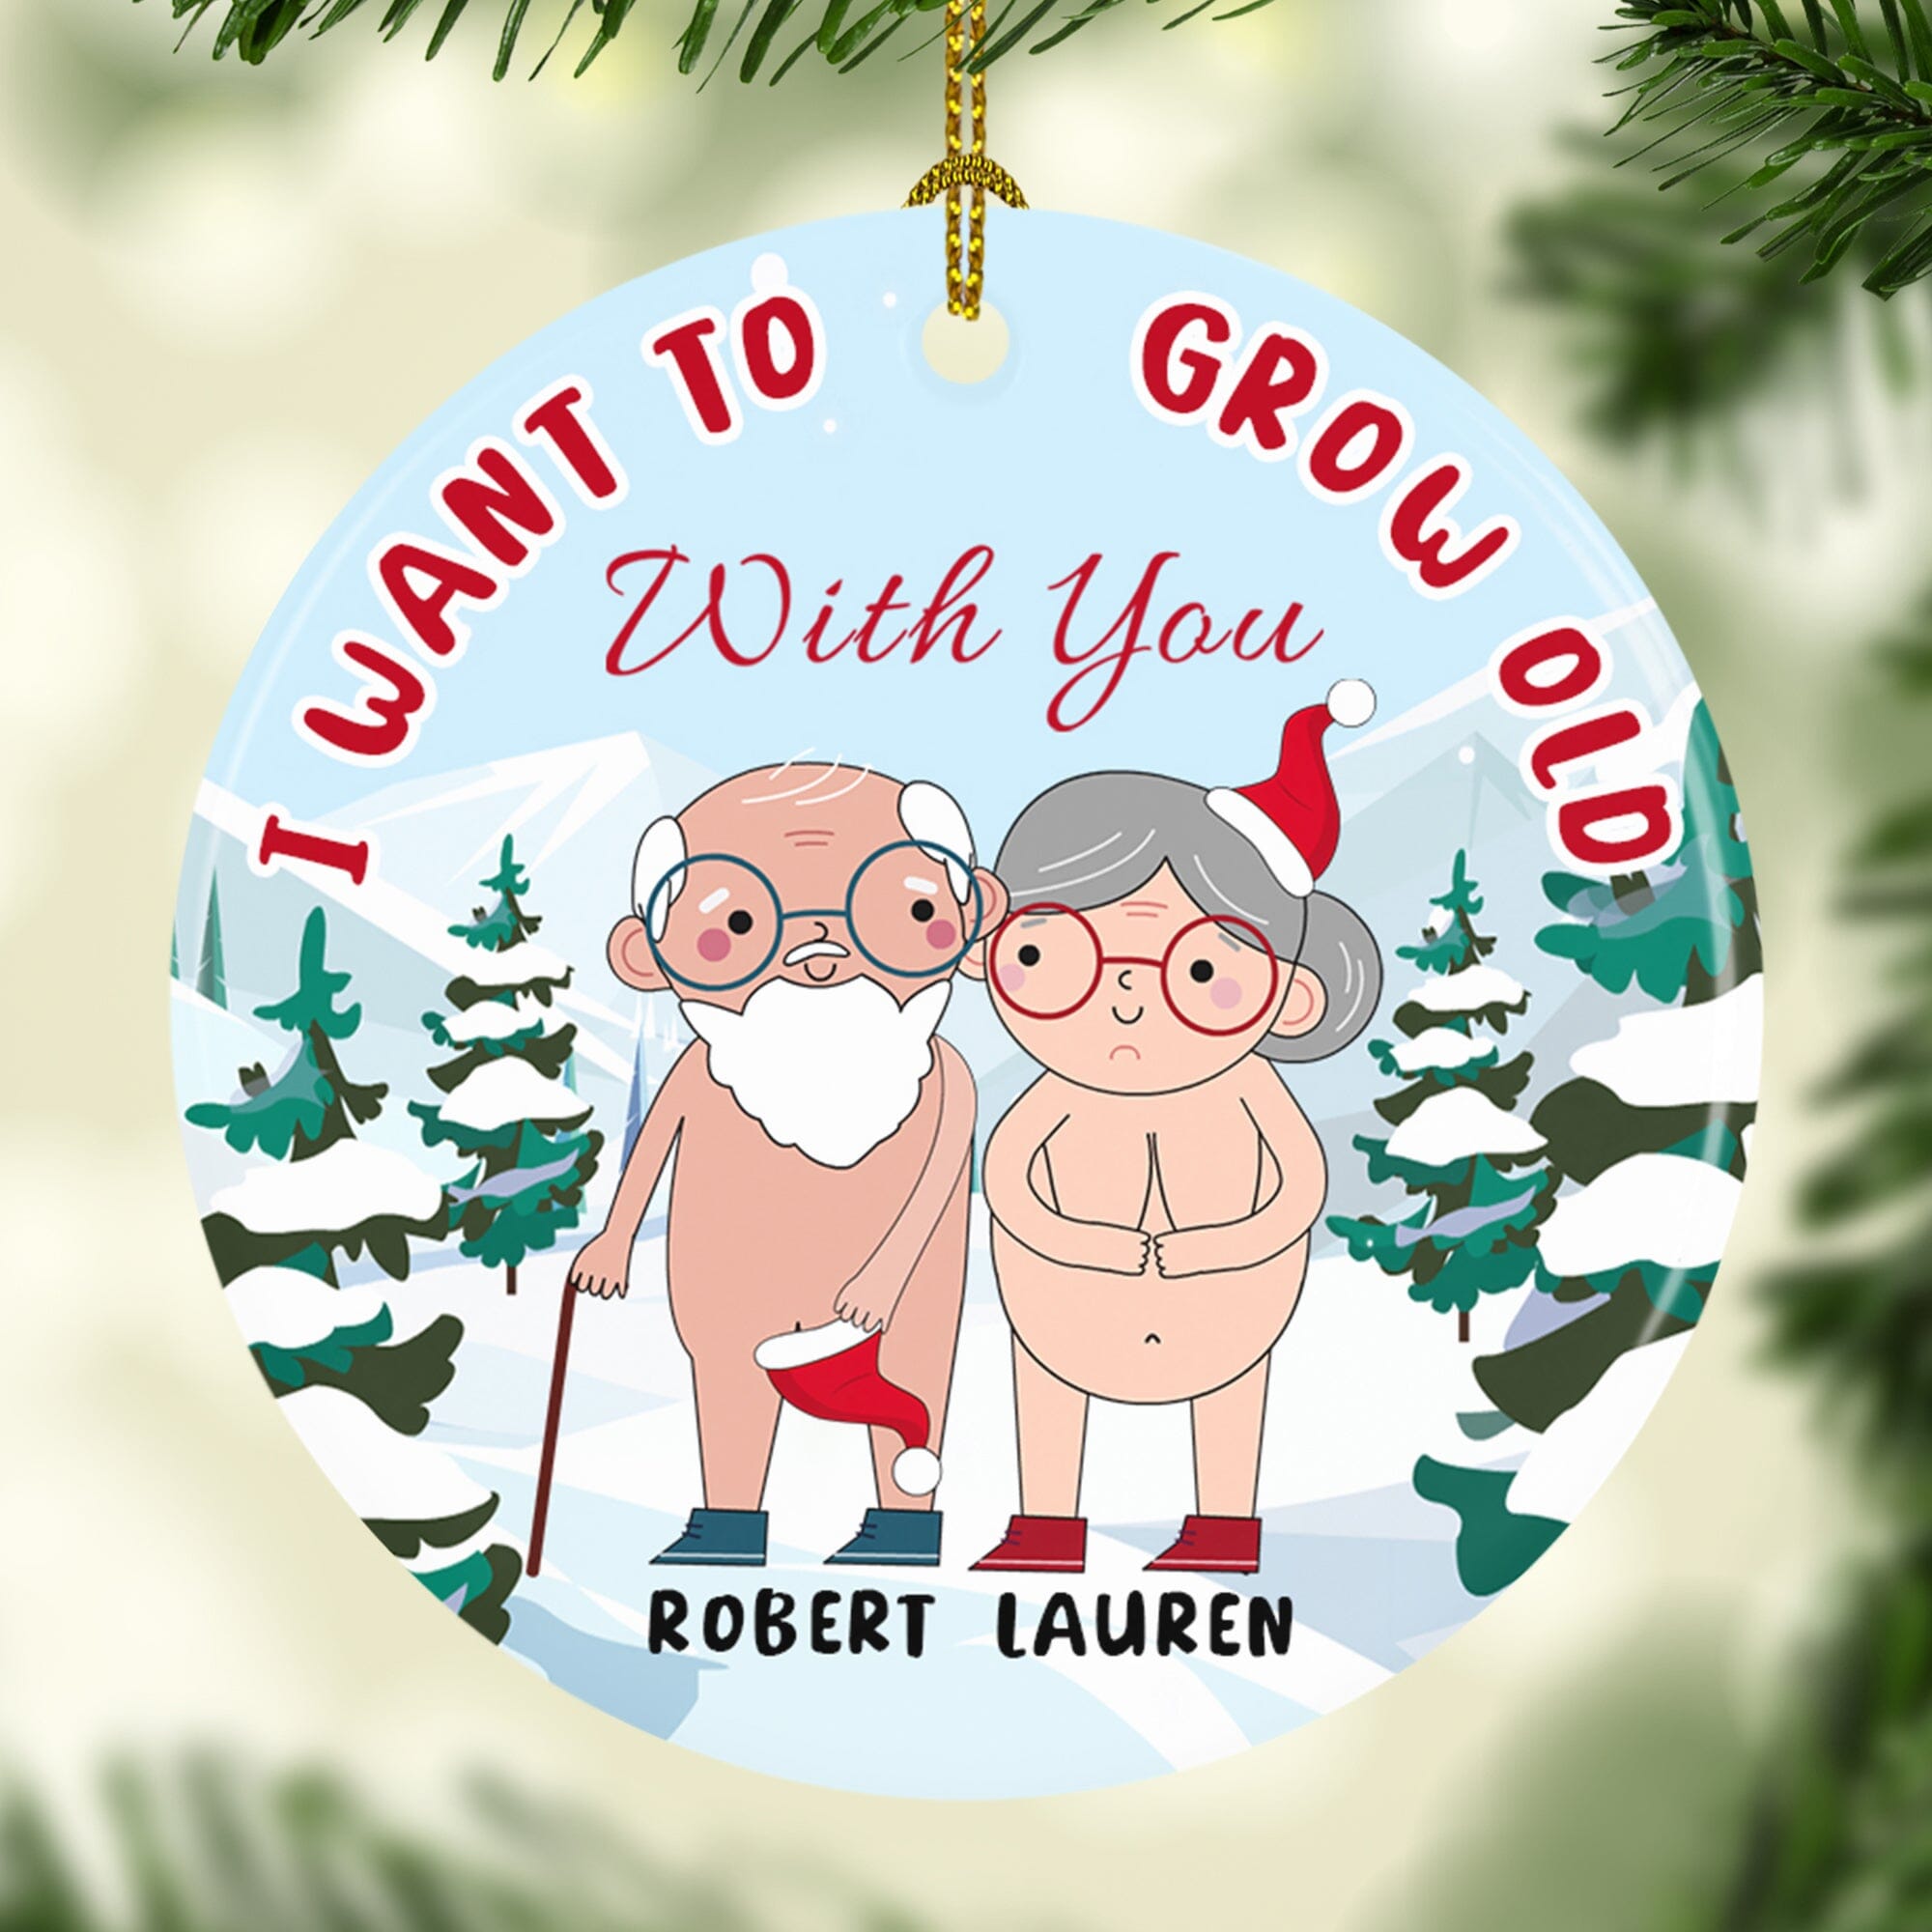 I Want To Grow Old With You (CUSTOM) Ceramic Ornaments